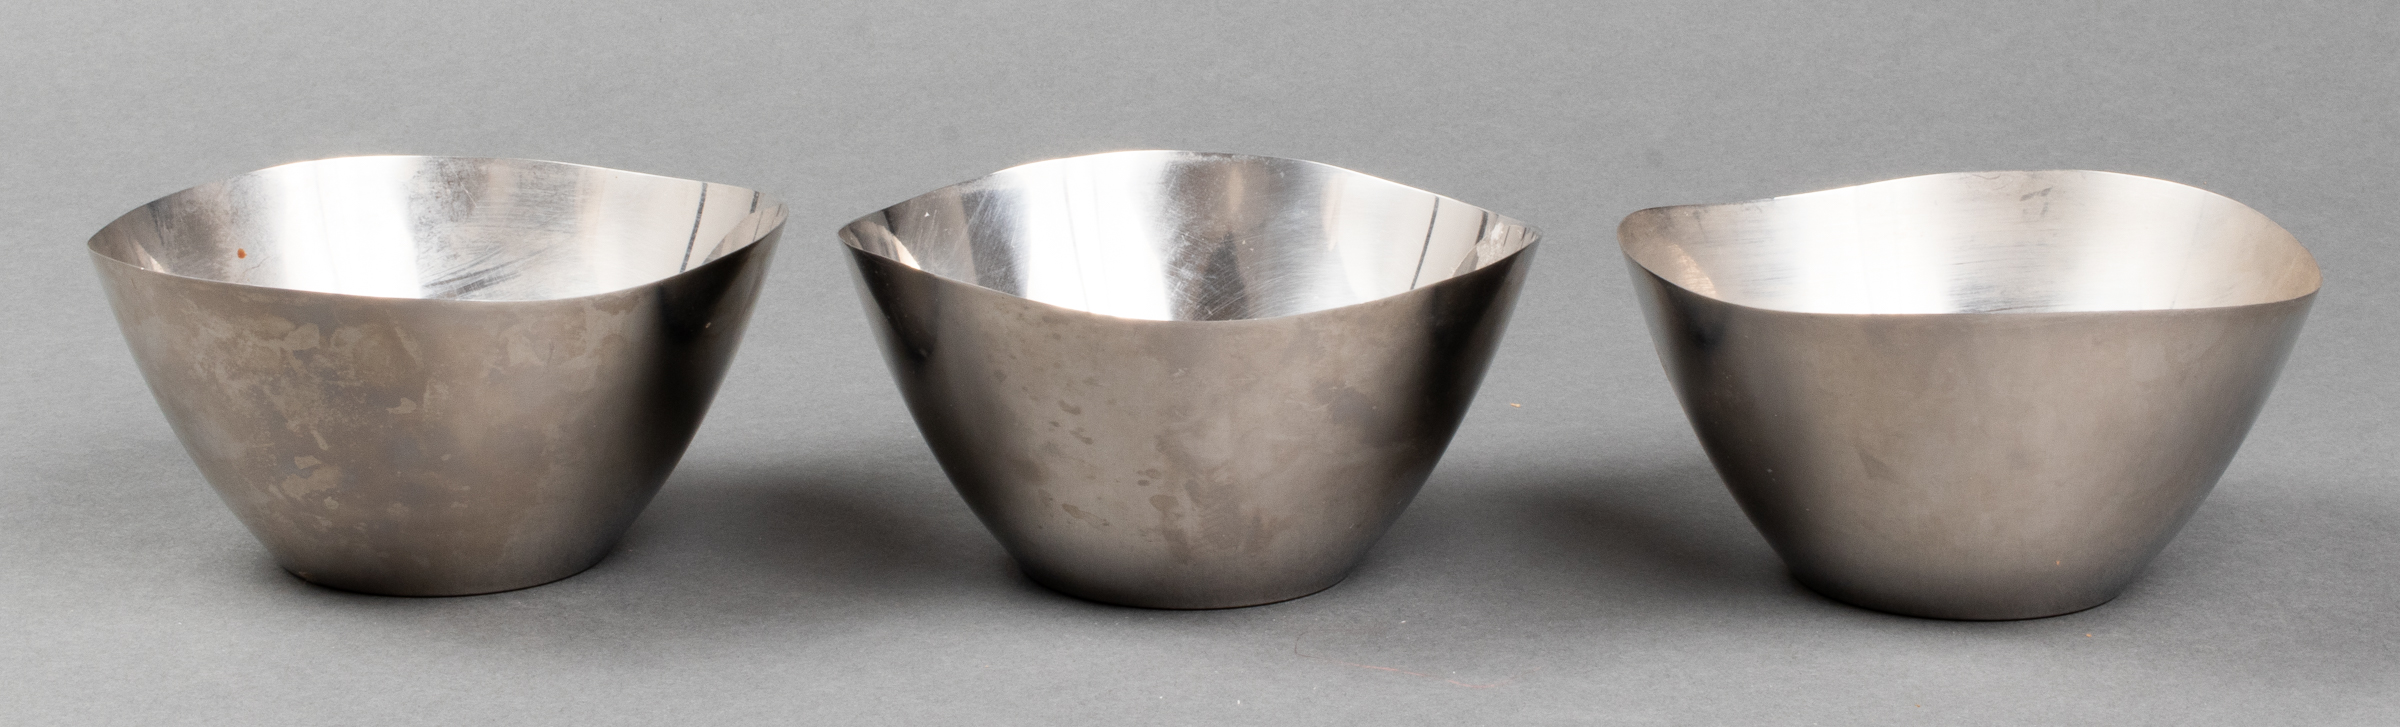 DANISH STAINLESS STEEL BOWLS 3 3c3bac